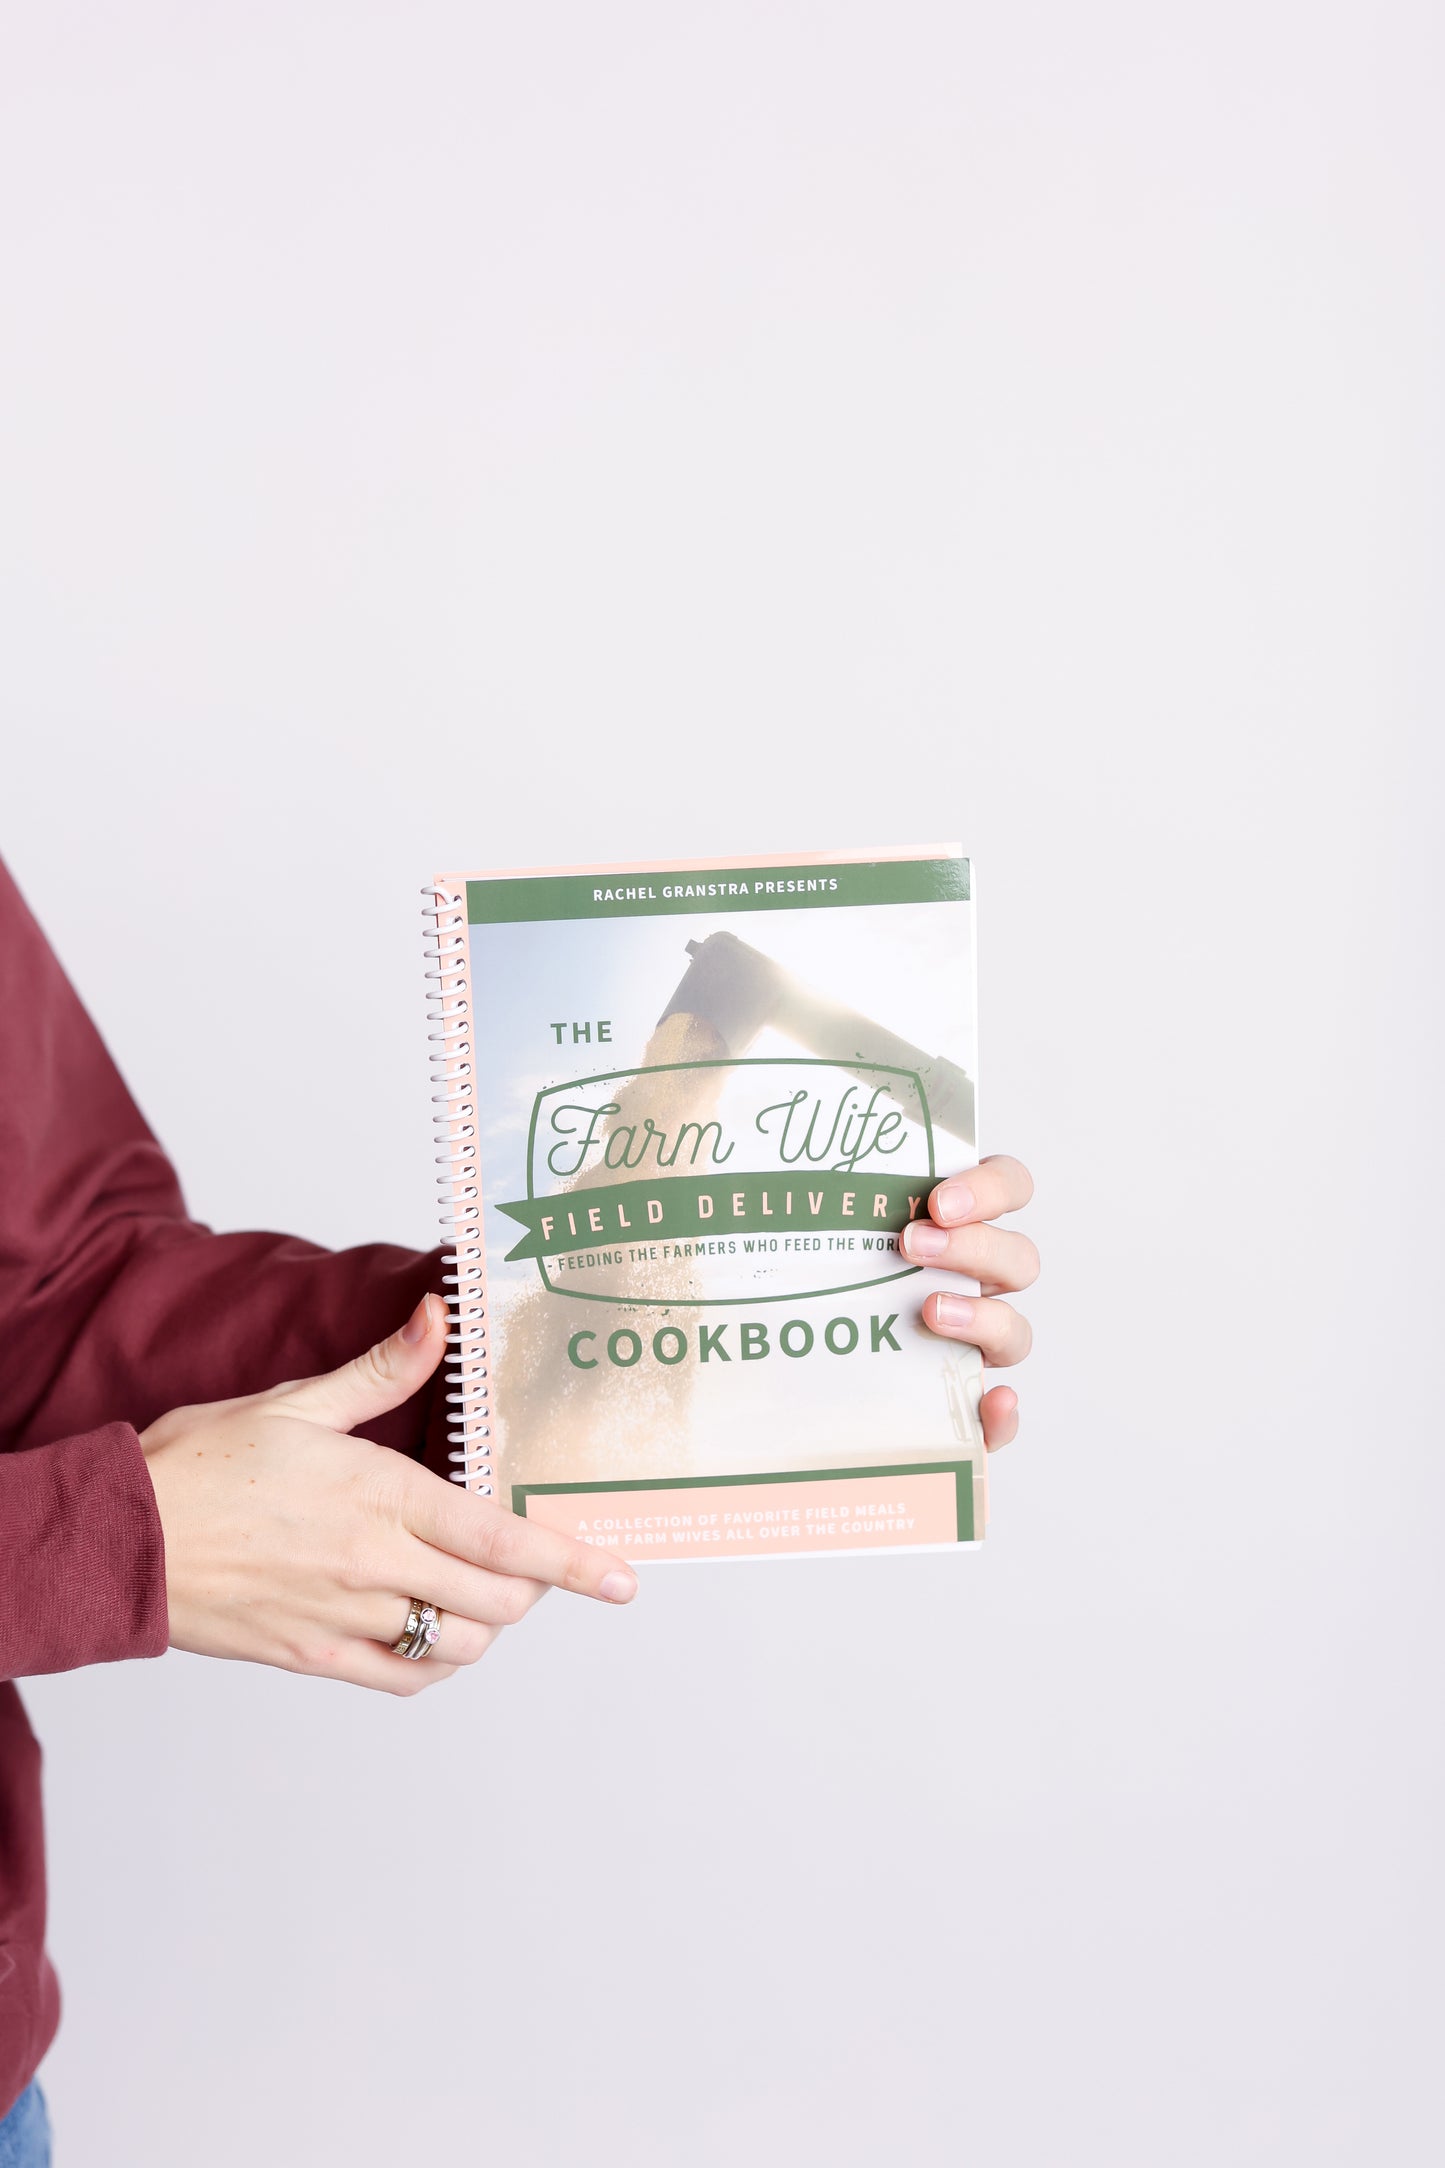 Farm Wife Field Delivery Cookbook with woman holding it